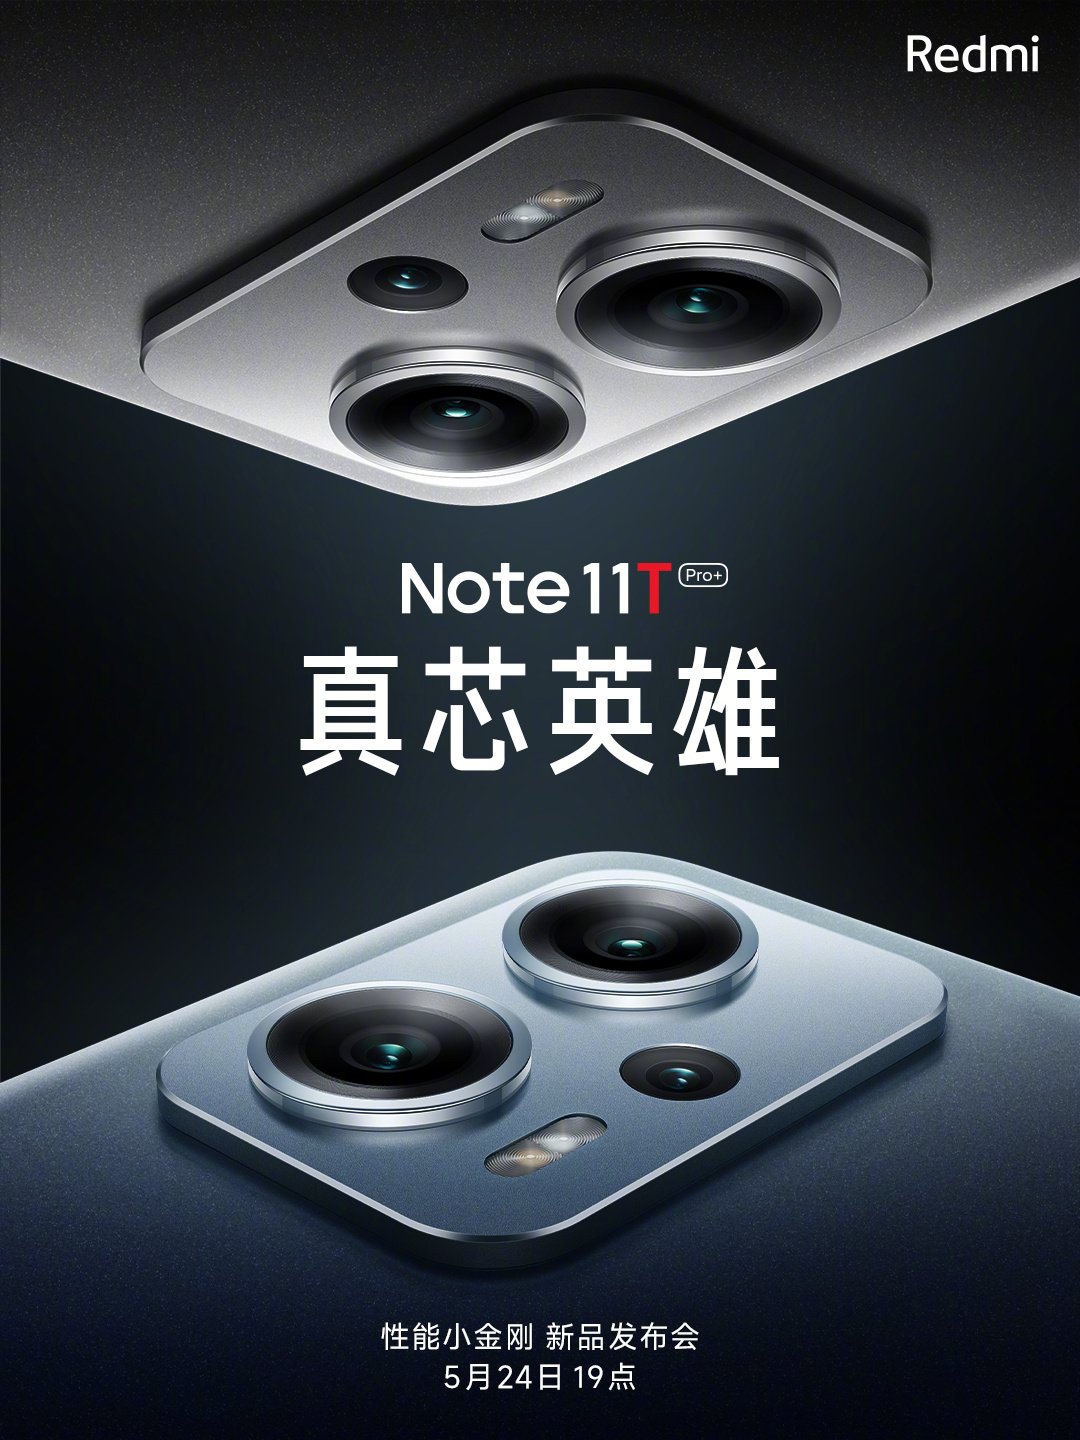 Redmi Note 11T Pro, 11T Pro+ launch date confirmed, here's what to expect -  Gizmochina